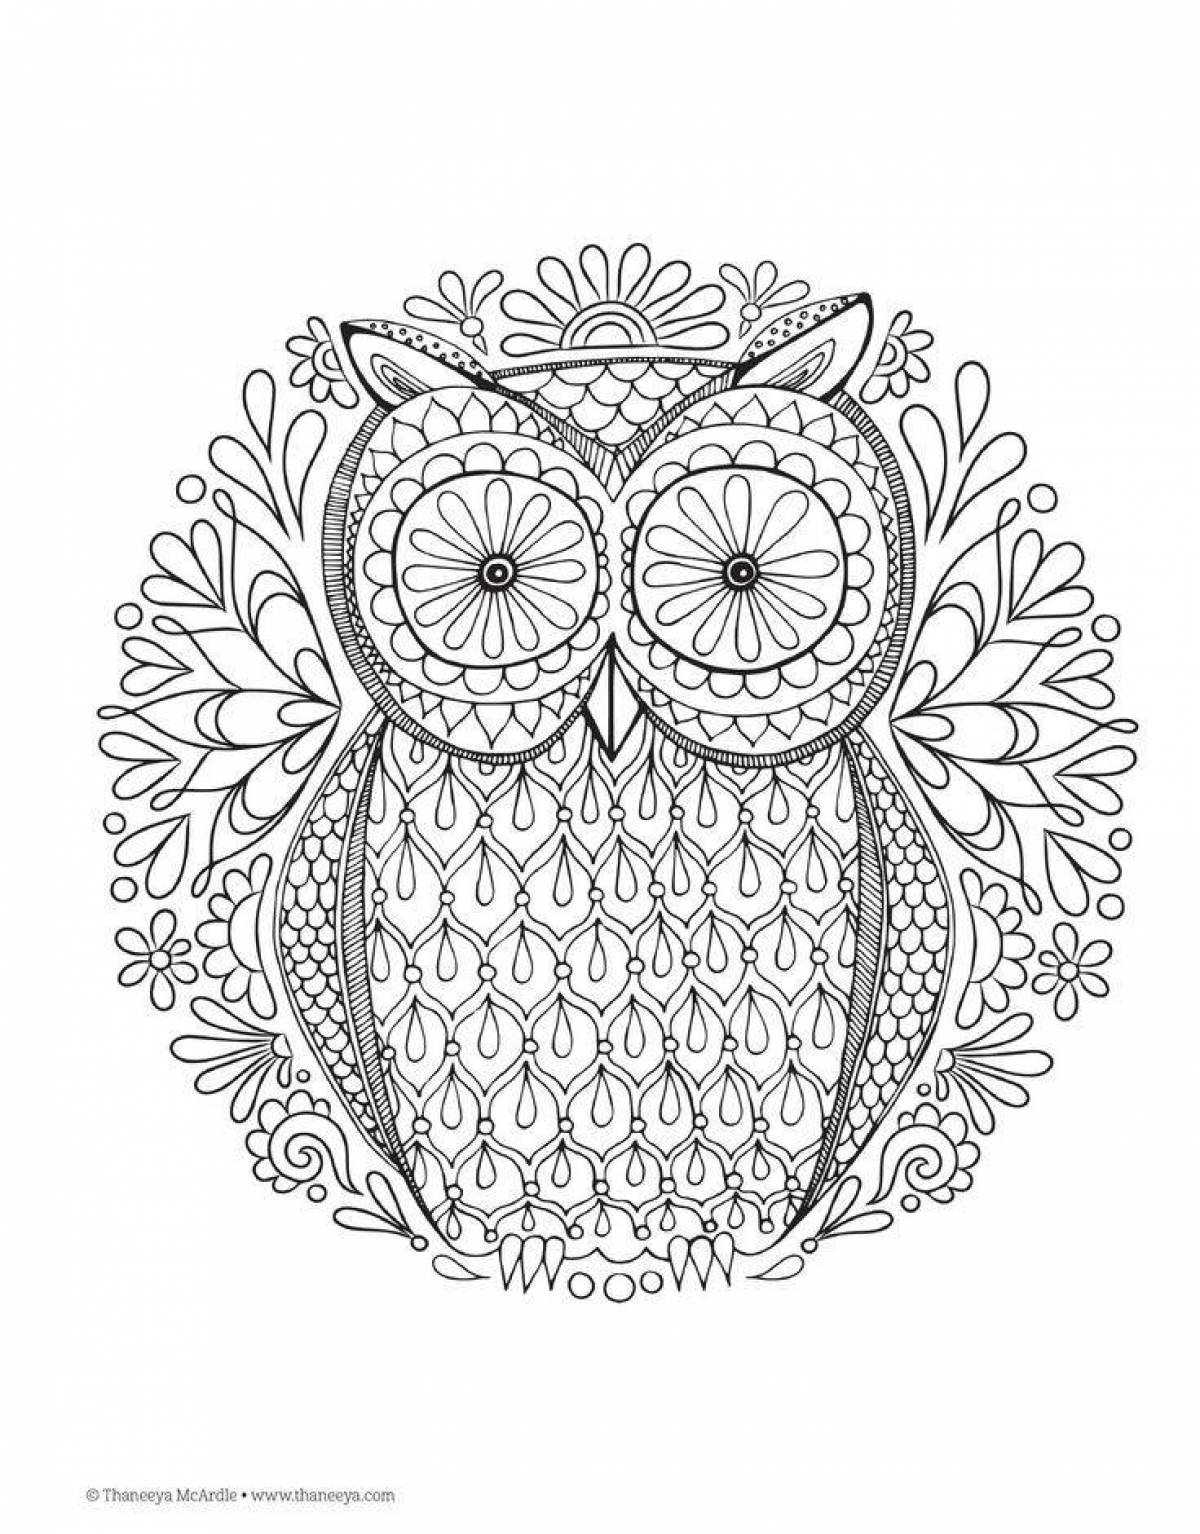 Exquisite coloring owl antistress